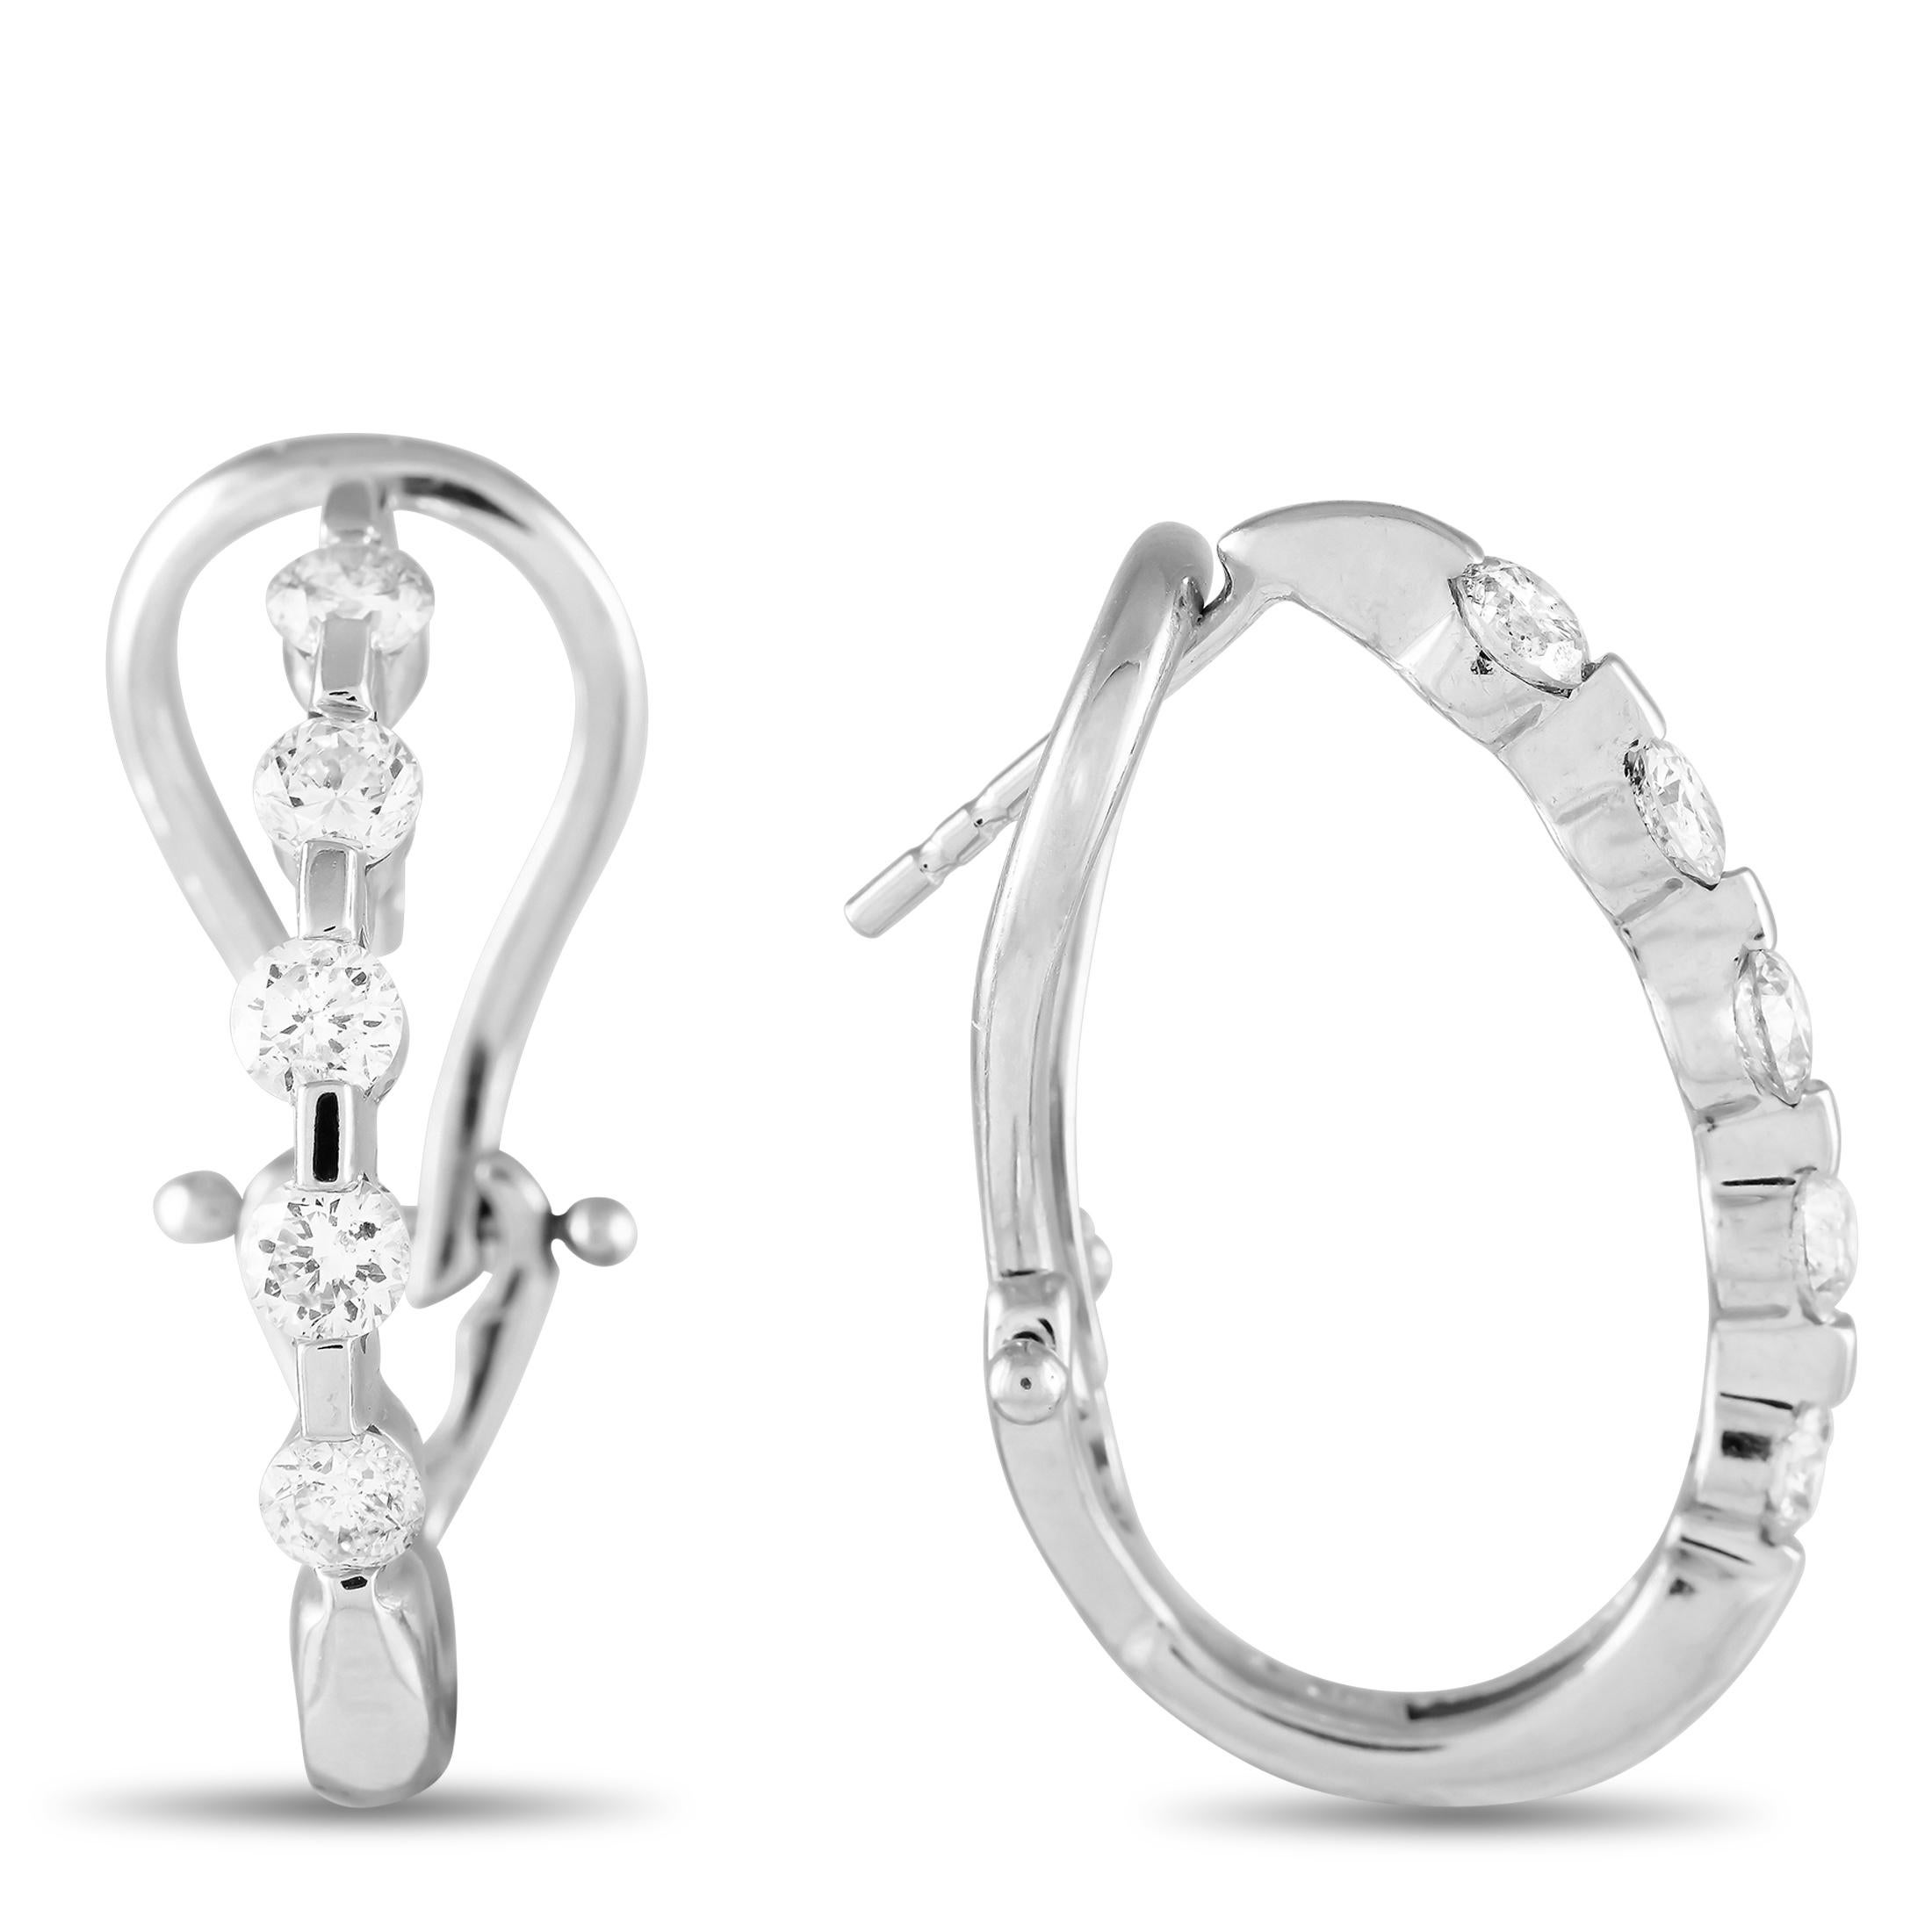 A delicate 14K White Gold setting provides the perfect foundation for these exquisite earrings. Special enough for any occasion, each one measures 1.0 long by 0.65 wide. Together, they showcase sparkling Diamonds with a total weight of 0.50